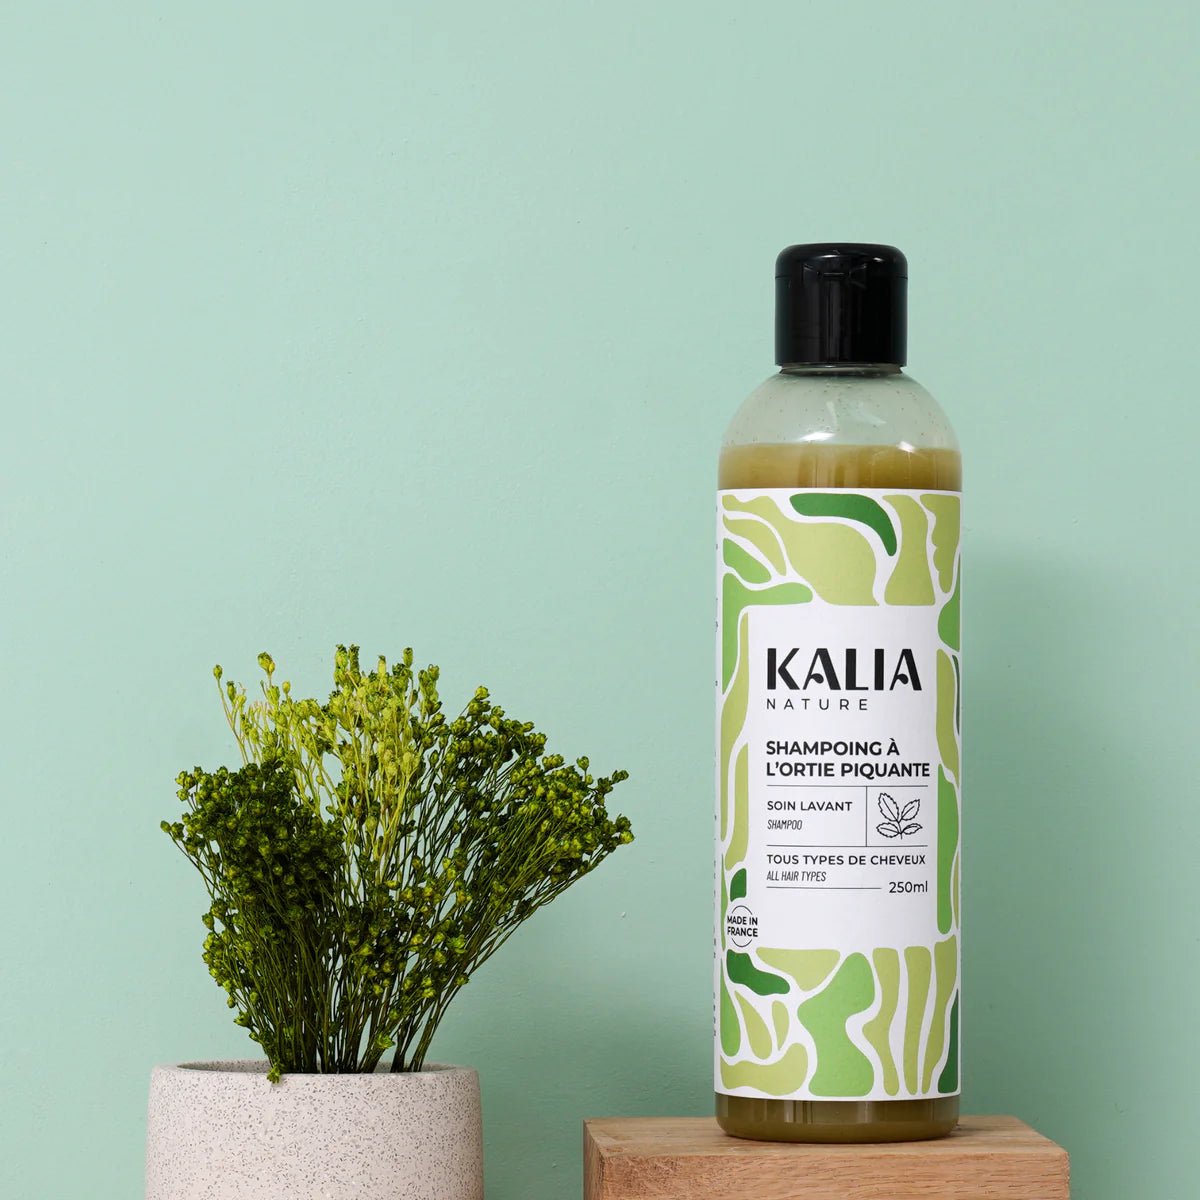 Kalia Nature Shampoing A L'ortie Piquante - Ethnilink